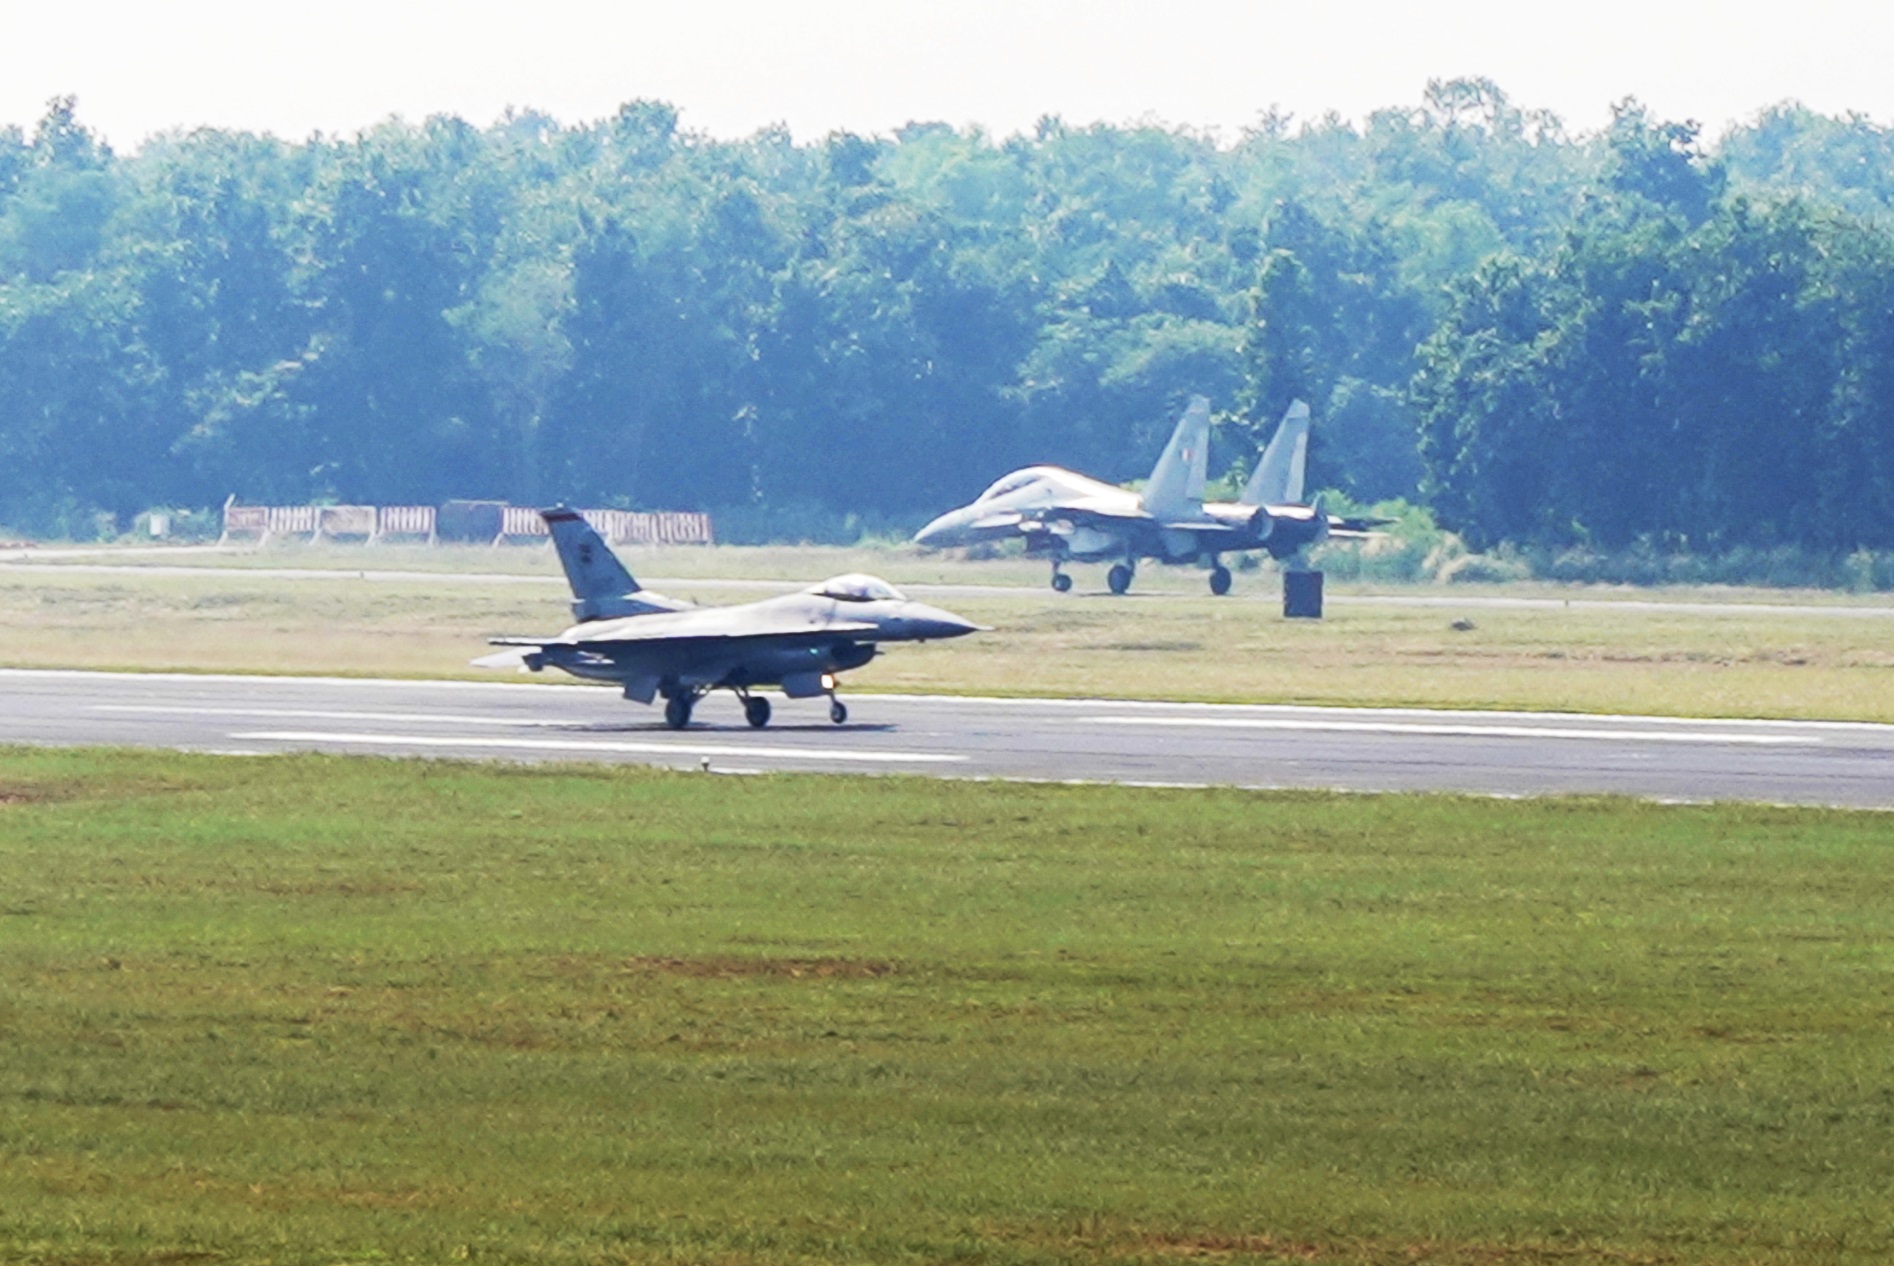 An RSAF's F-16C (foreground) and an India Air Force's (IAF) SU-30MKI fighter aircraft (background) at the Kalaikunda Air Force Station runway before take-off as part of JMT 19. Photo courtesy: MIndef